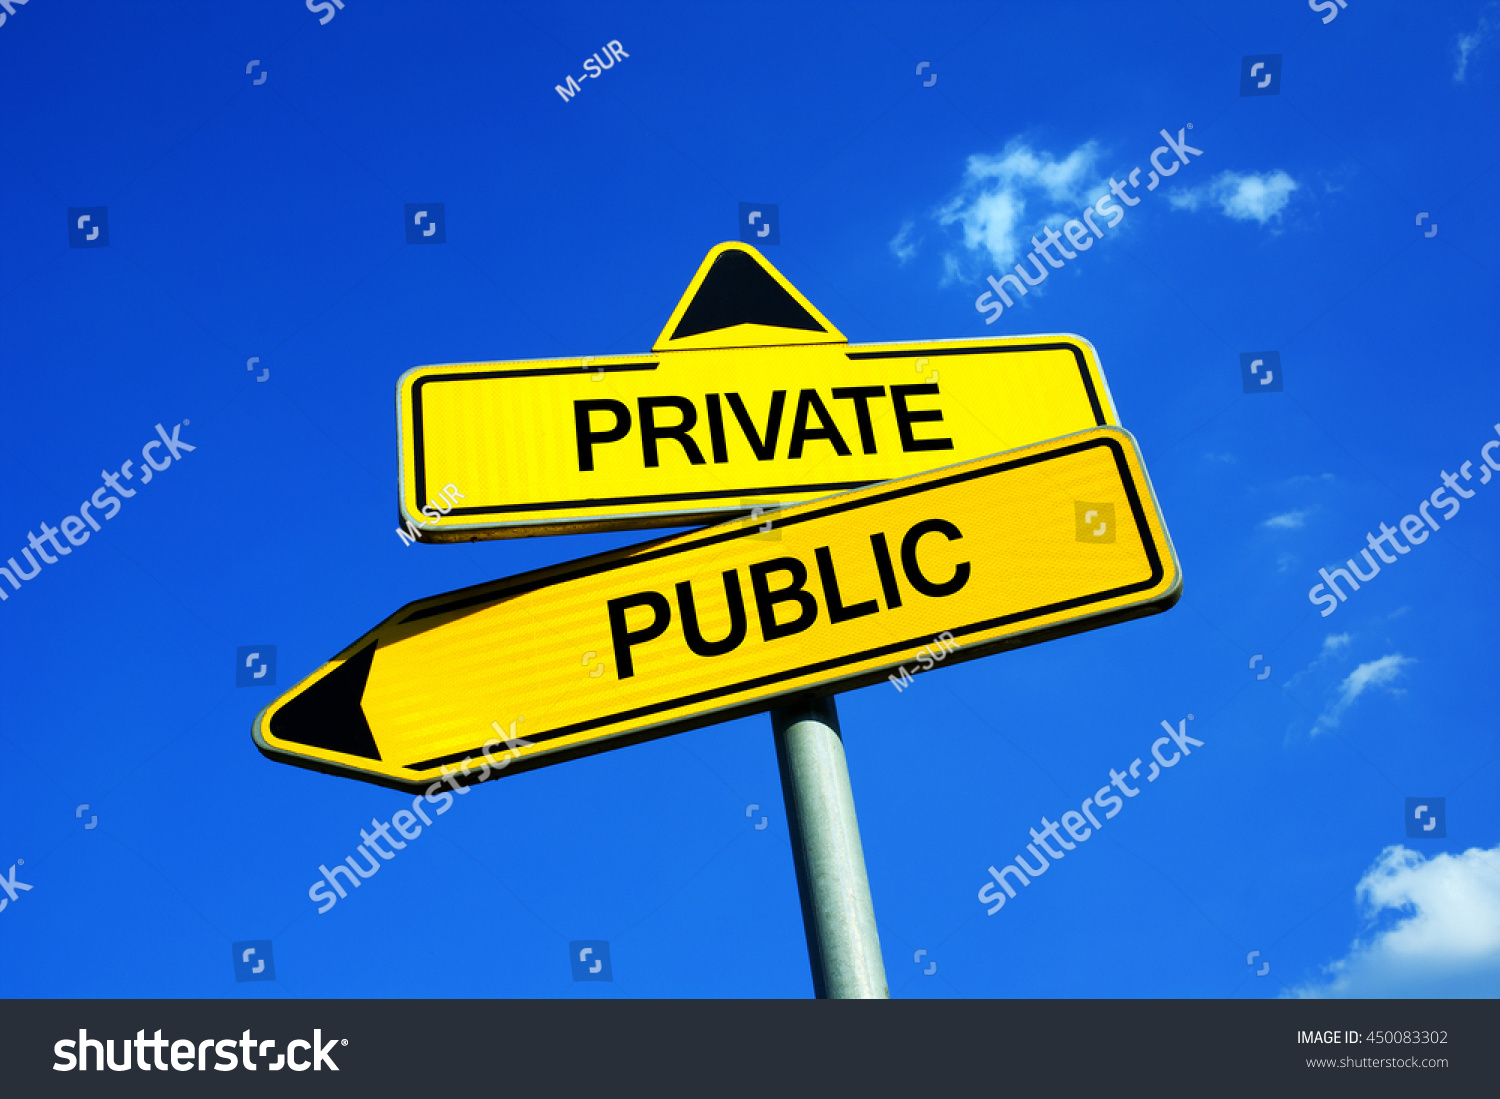 Private or Public - Traffic sign with two options - services and companies owned by state or private businessman. Socialist / Capitalist question of privatization, school system, health service